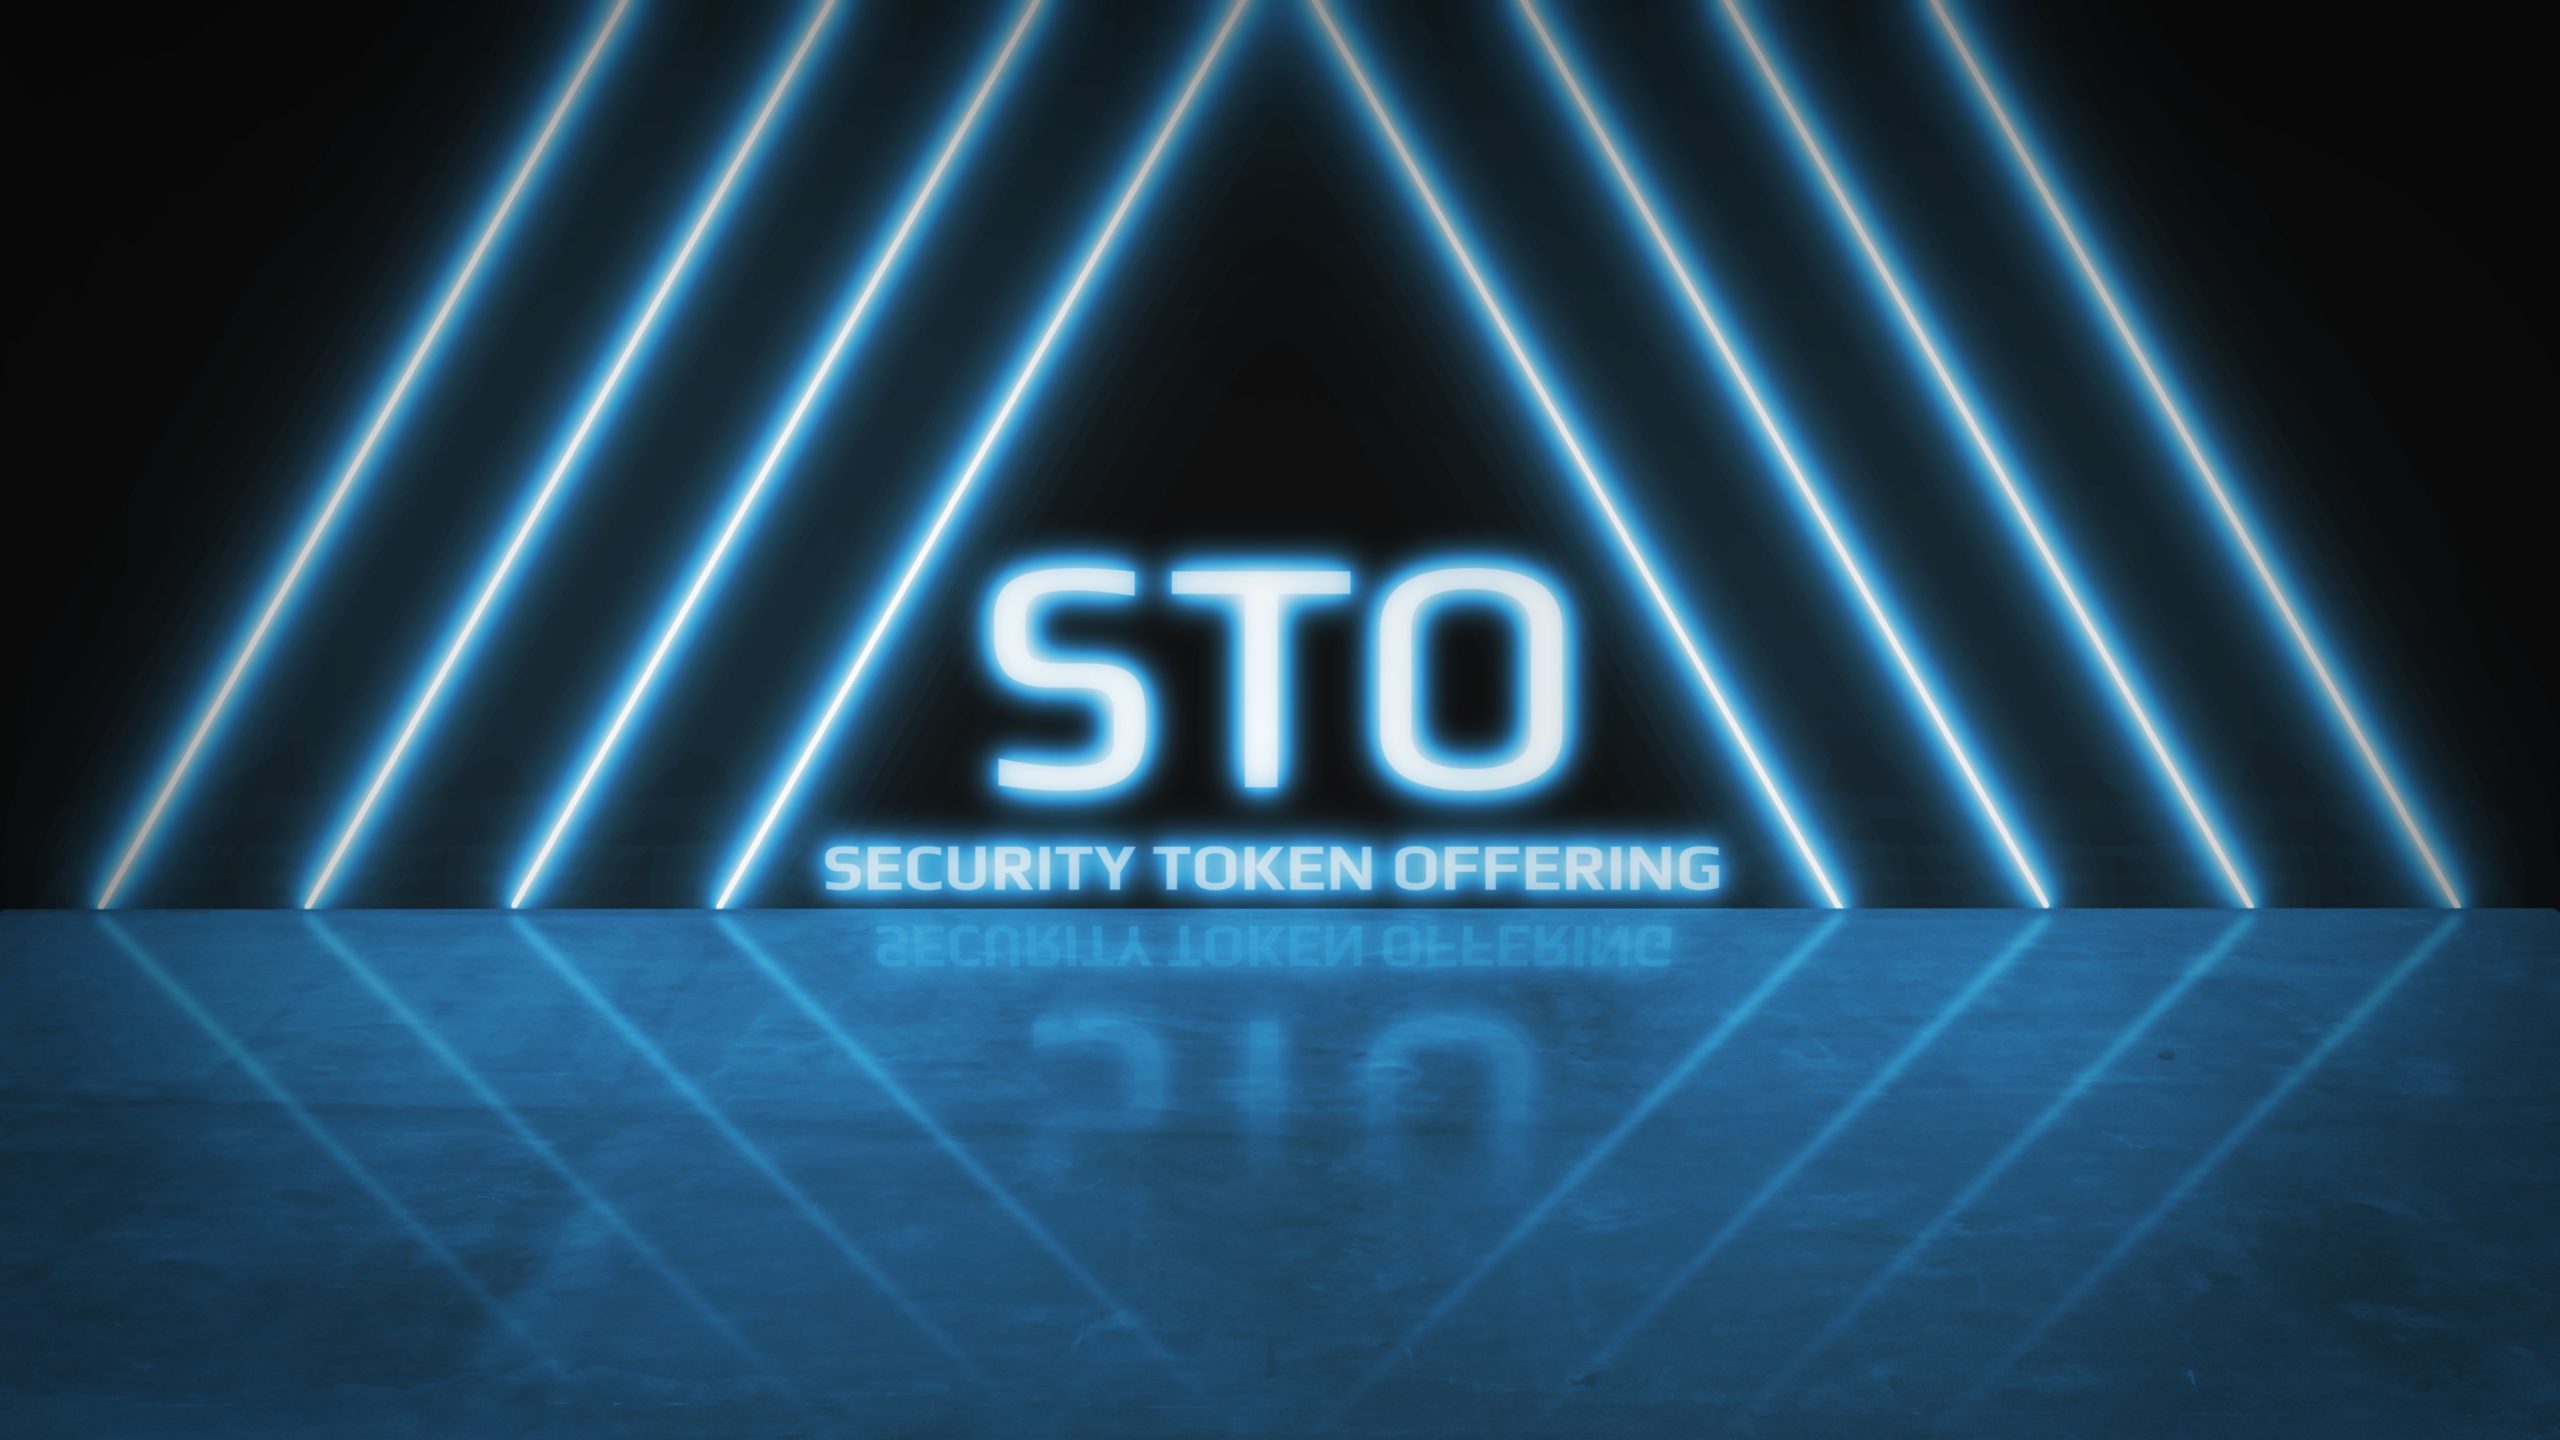 What’s an “STO” or Security Token Offering?